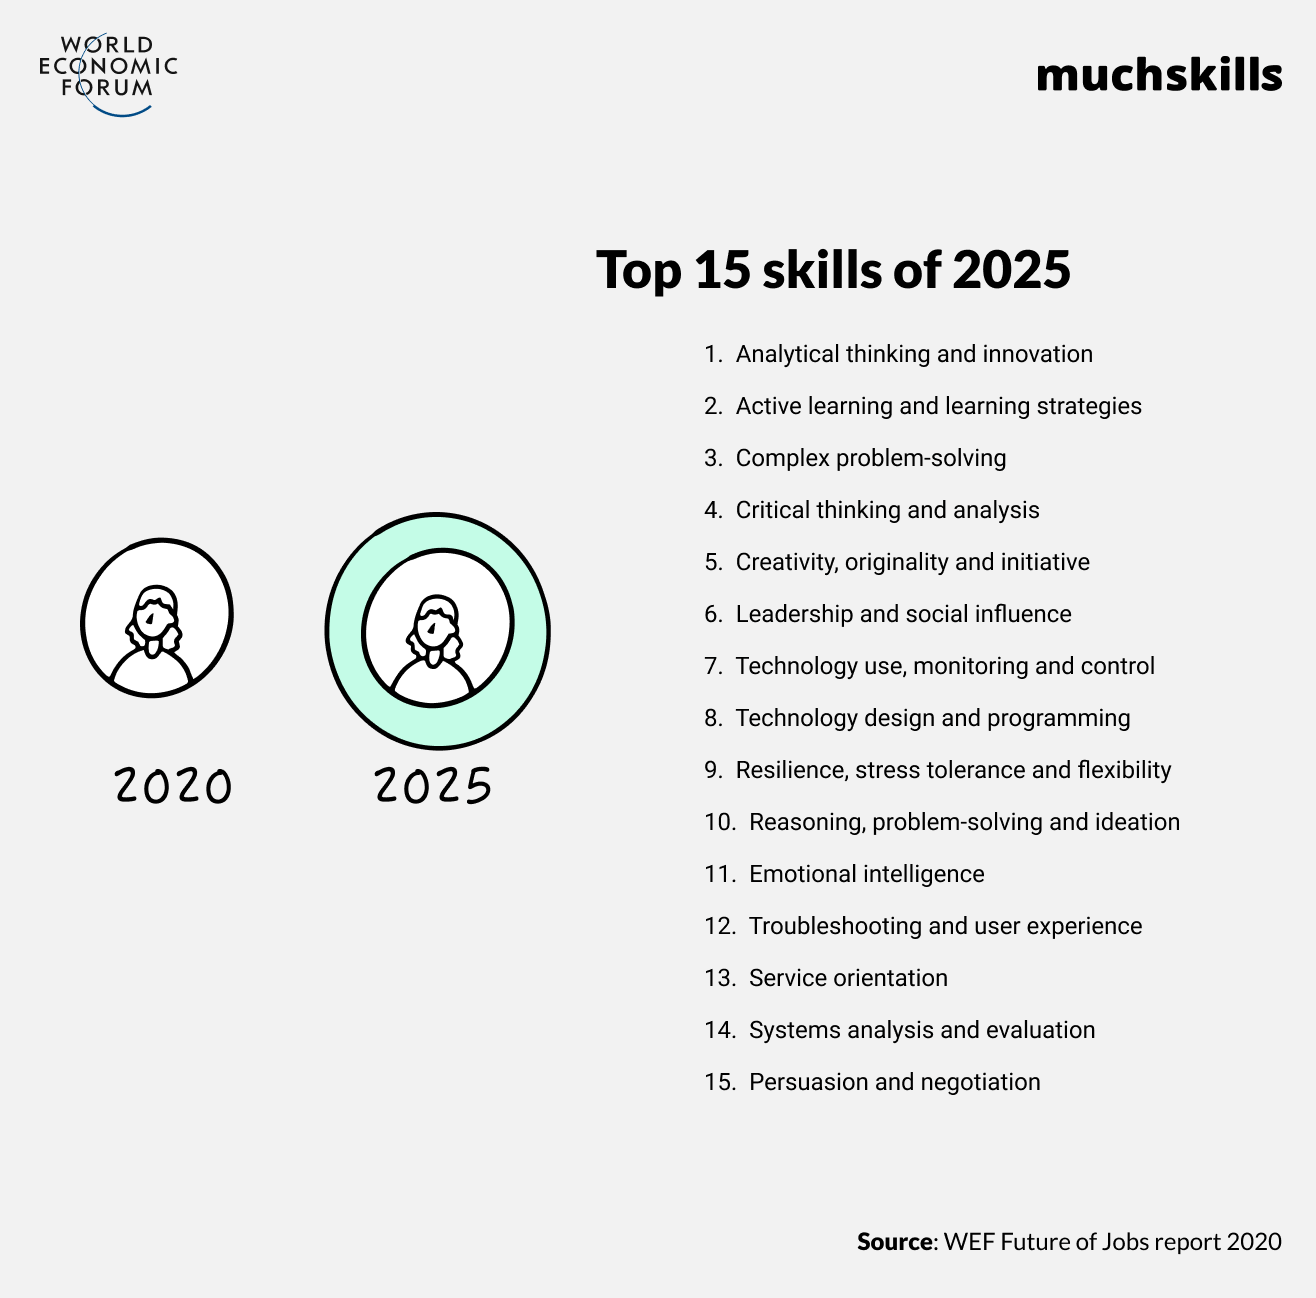 Top 15 skills of 2025  1. Analytical thinking and innovation  2. Active learning and learning strategies  3. Complex problem-solving  4. Critical thinking and analysis  5. Creativity, originality and initiative  6. Leadership and social influence  7. Technology use, monitoring and control  8. Technology design and programming  9. Resilience, stress tolerance and flexibility  10.  Reasoning, problem-solving and ideation  11.  Emotional intelligence  12.  Troubleshooting and user experience  13.  Service orientation  14.  Systems analysis and evaluation  15.  Persuasion and negotiation 